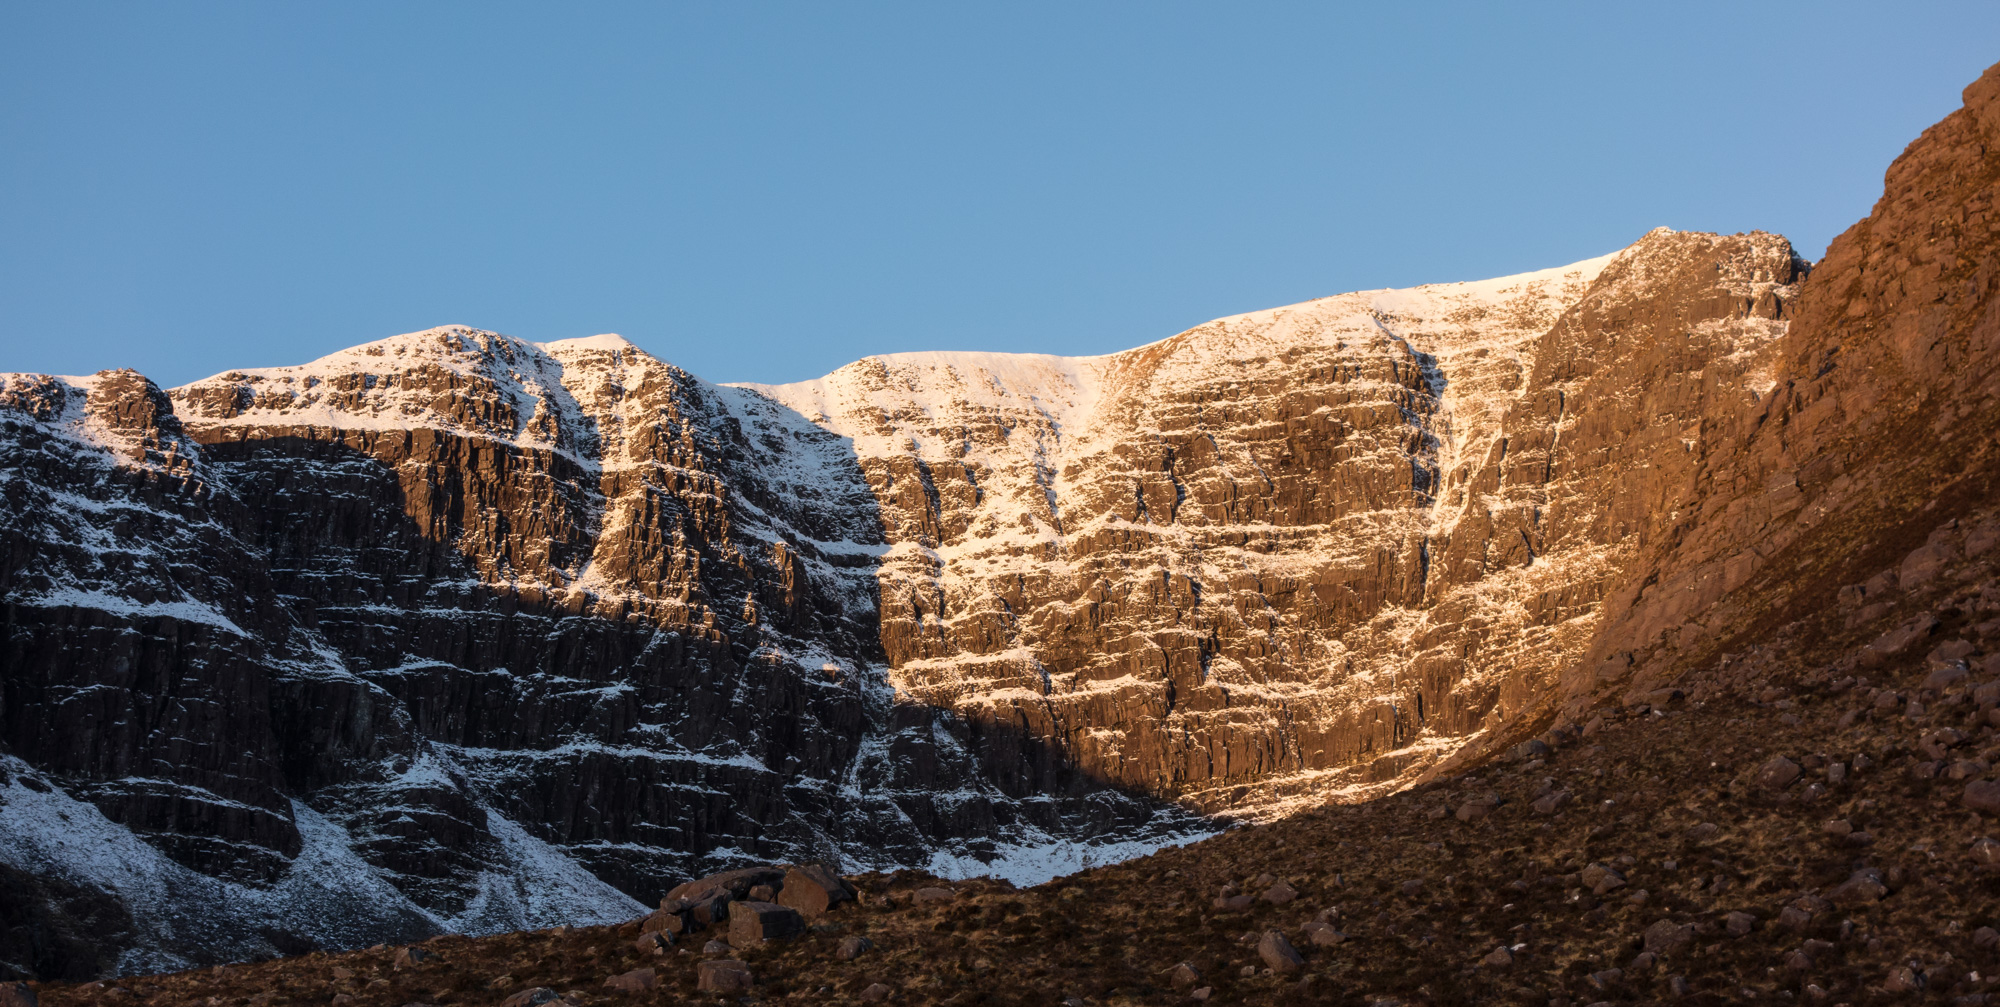 Early morning light fills Coire na Feola on the approach to A' Chioch